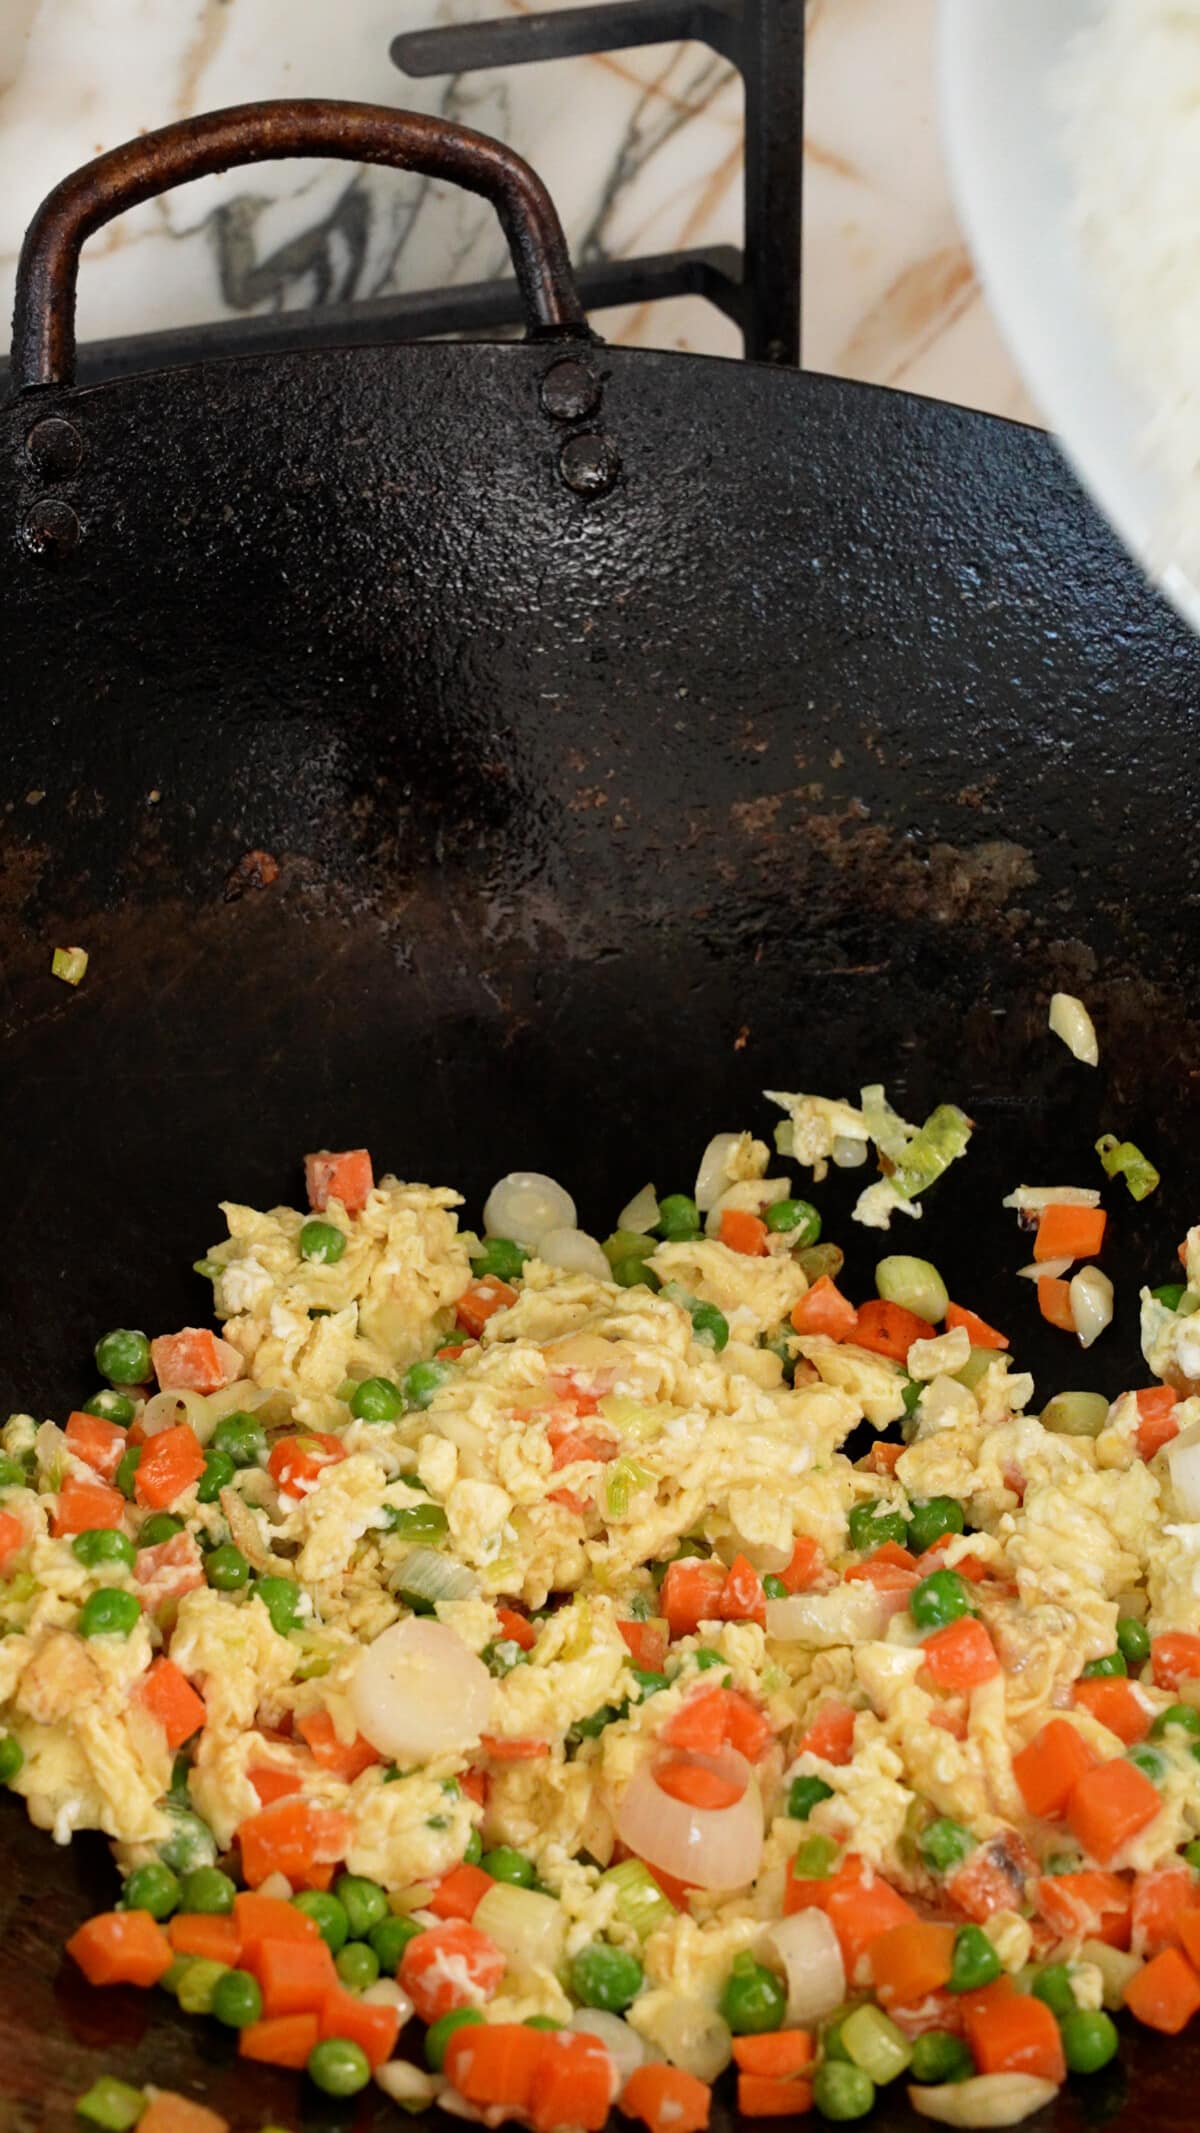 Eggs mixed together with vegetables and aromatics in a wok.